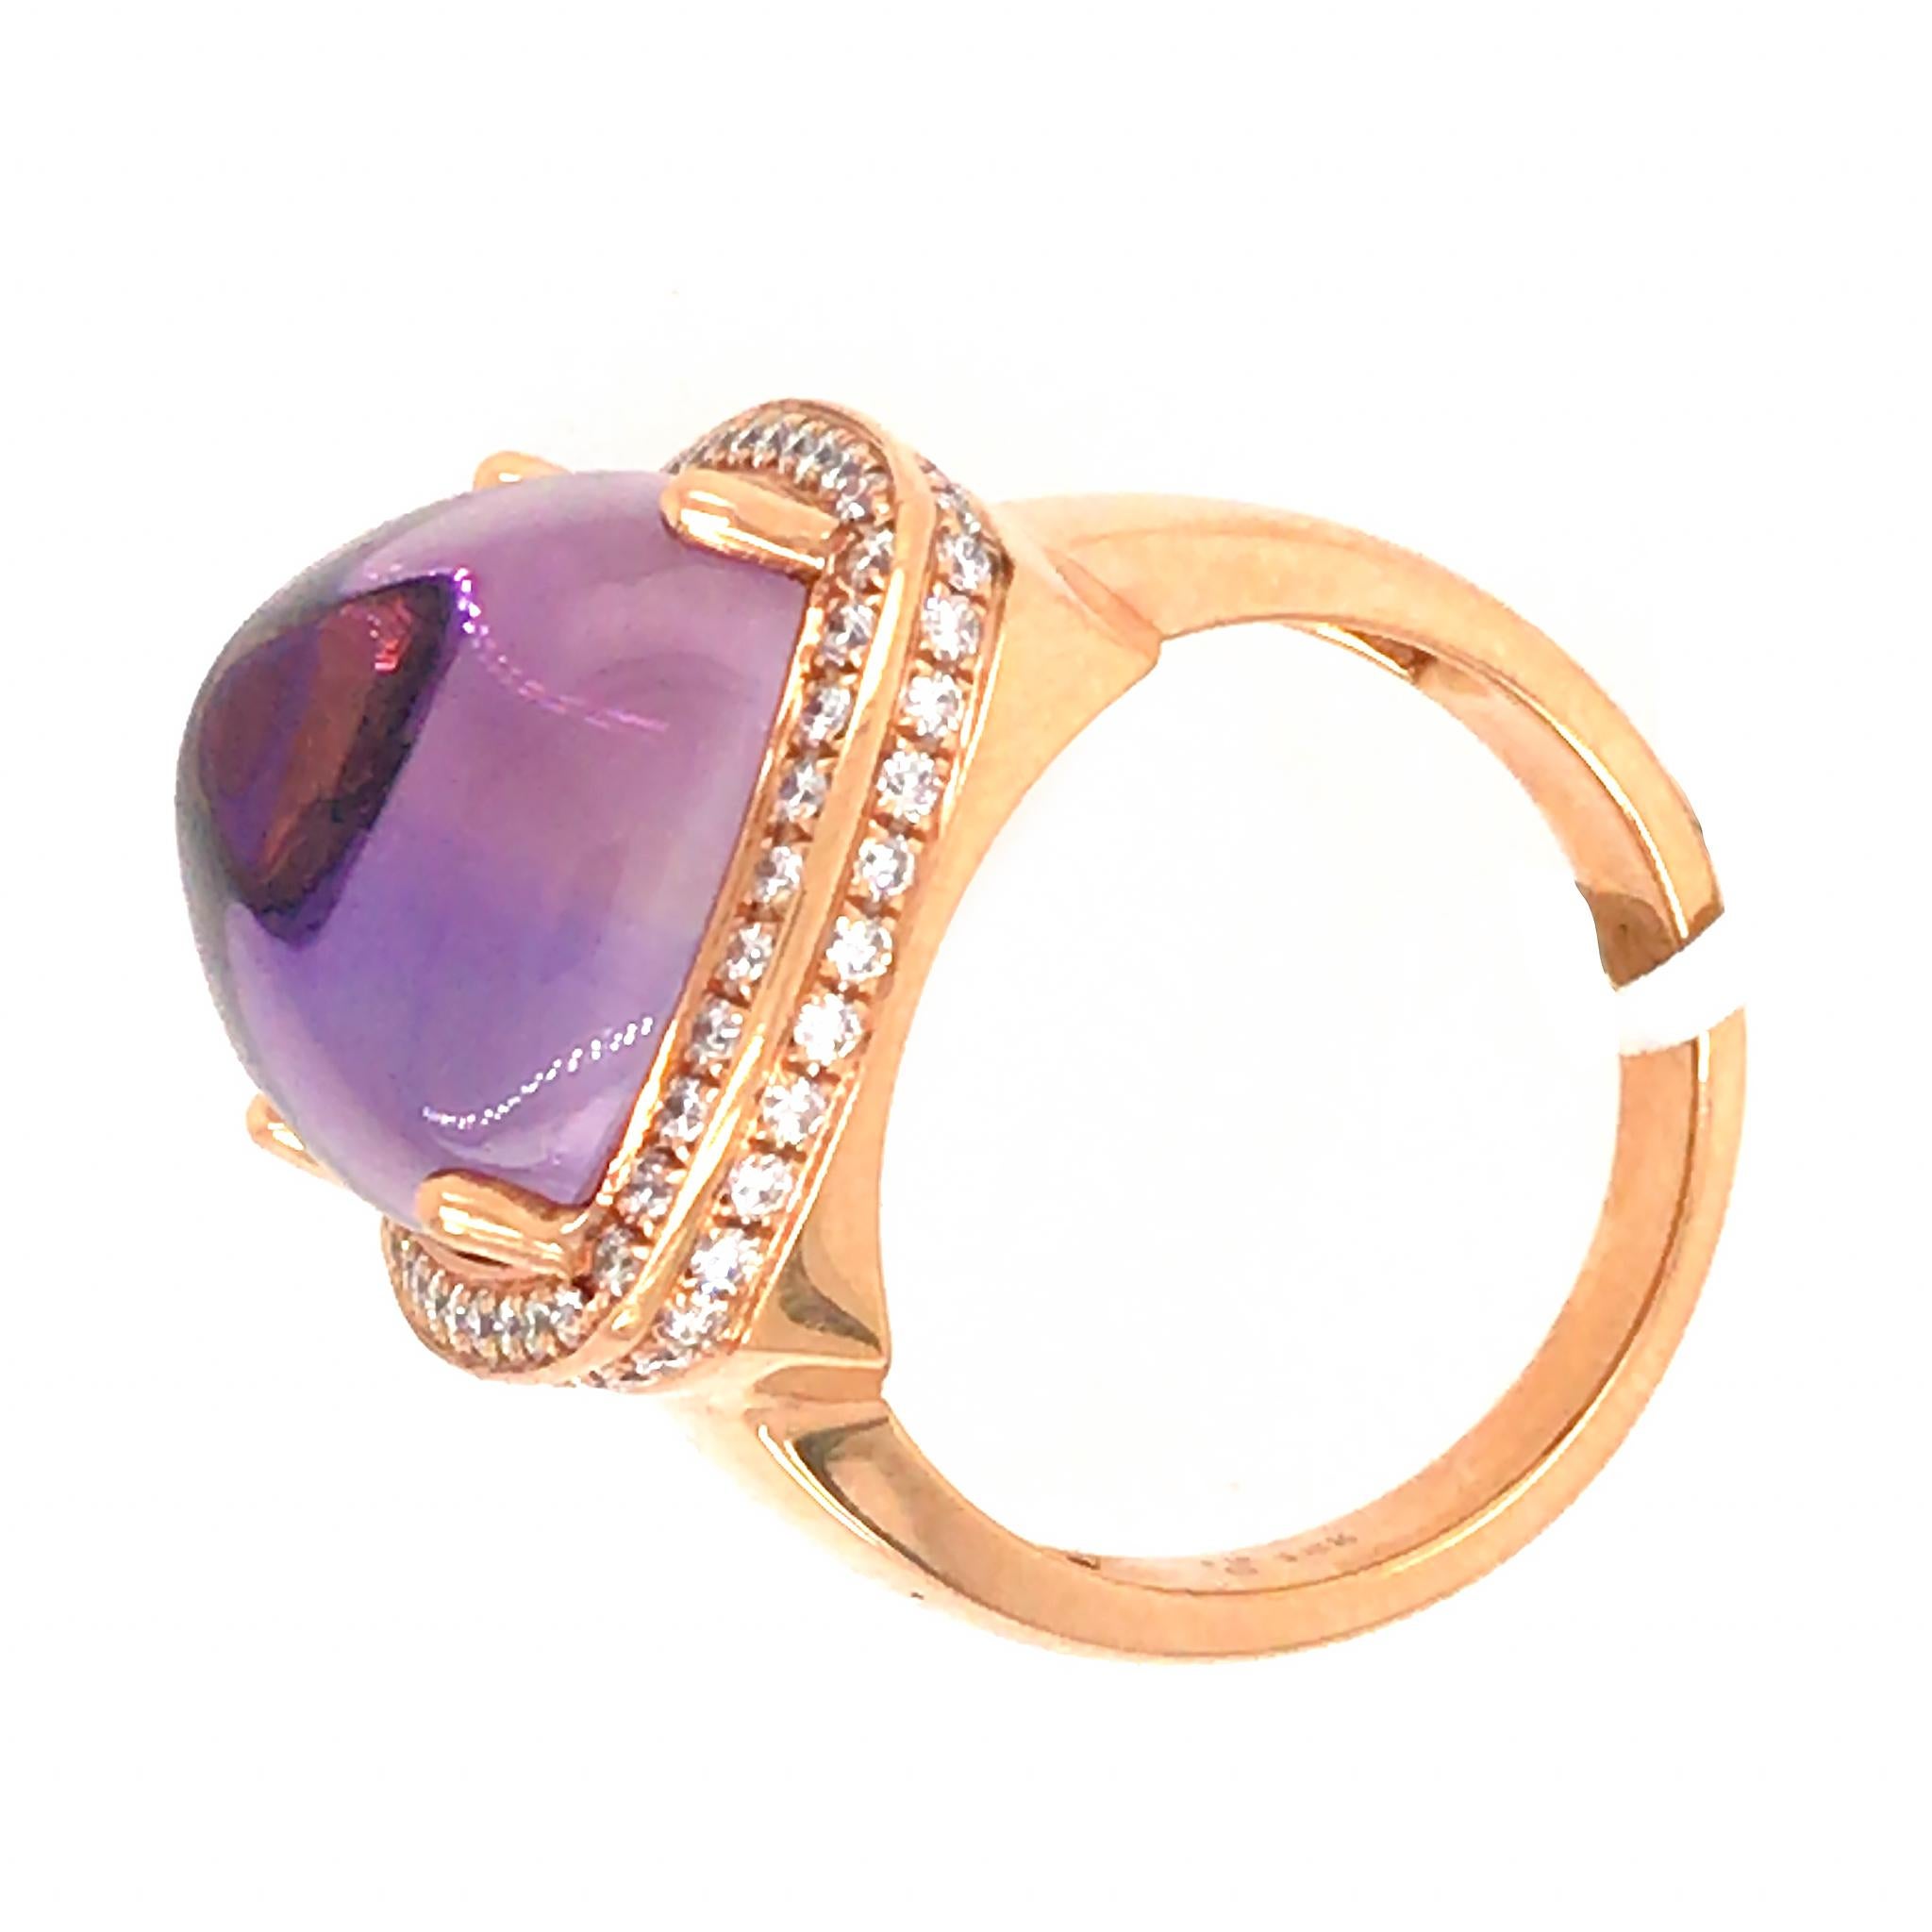 18k Rose Gold
Amethyst: 11.78 tcw
Diamond: 0.58 ct twd
Ring Size: 6.5
Total Weight: 12.4 grams